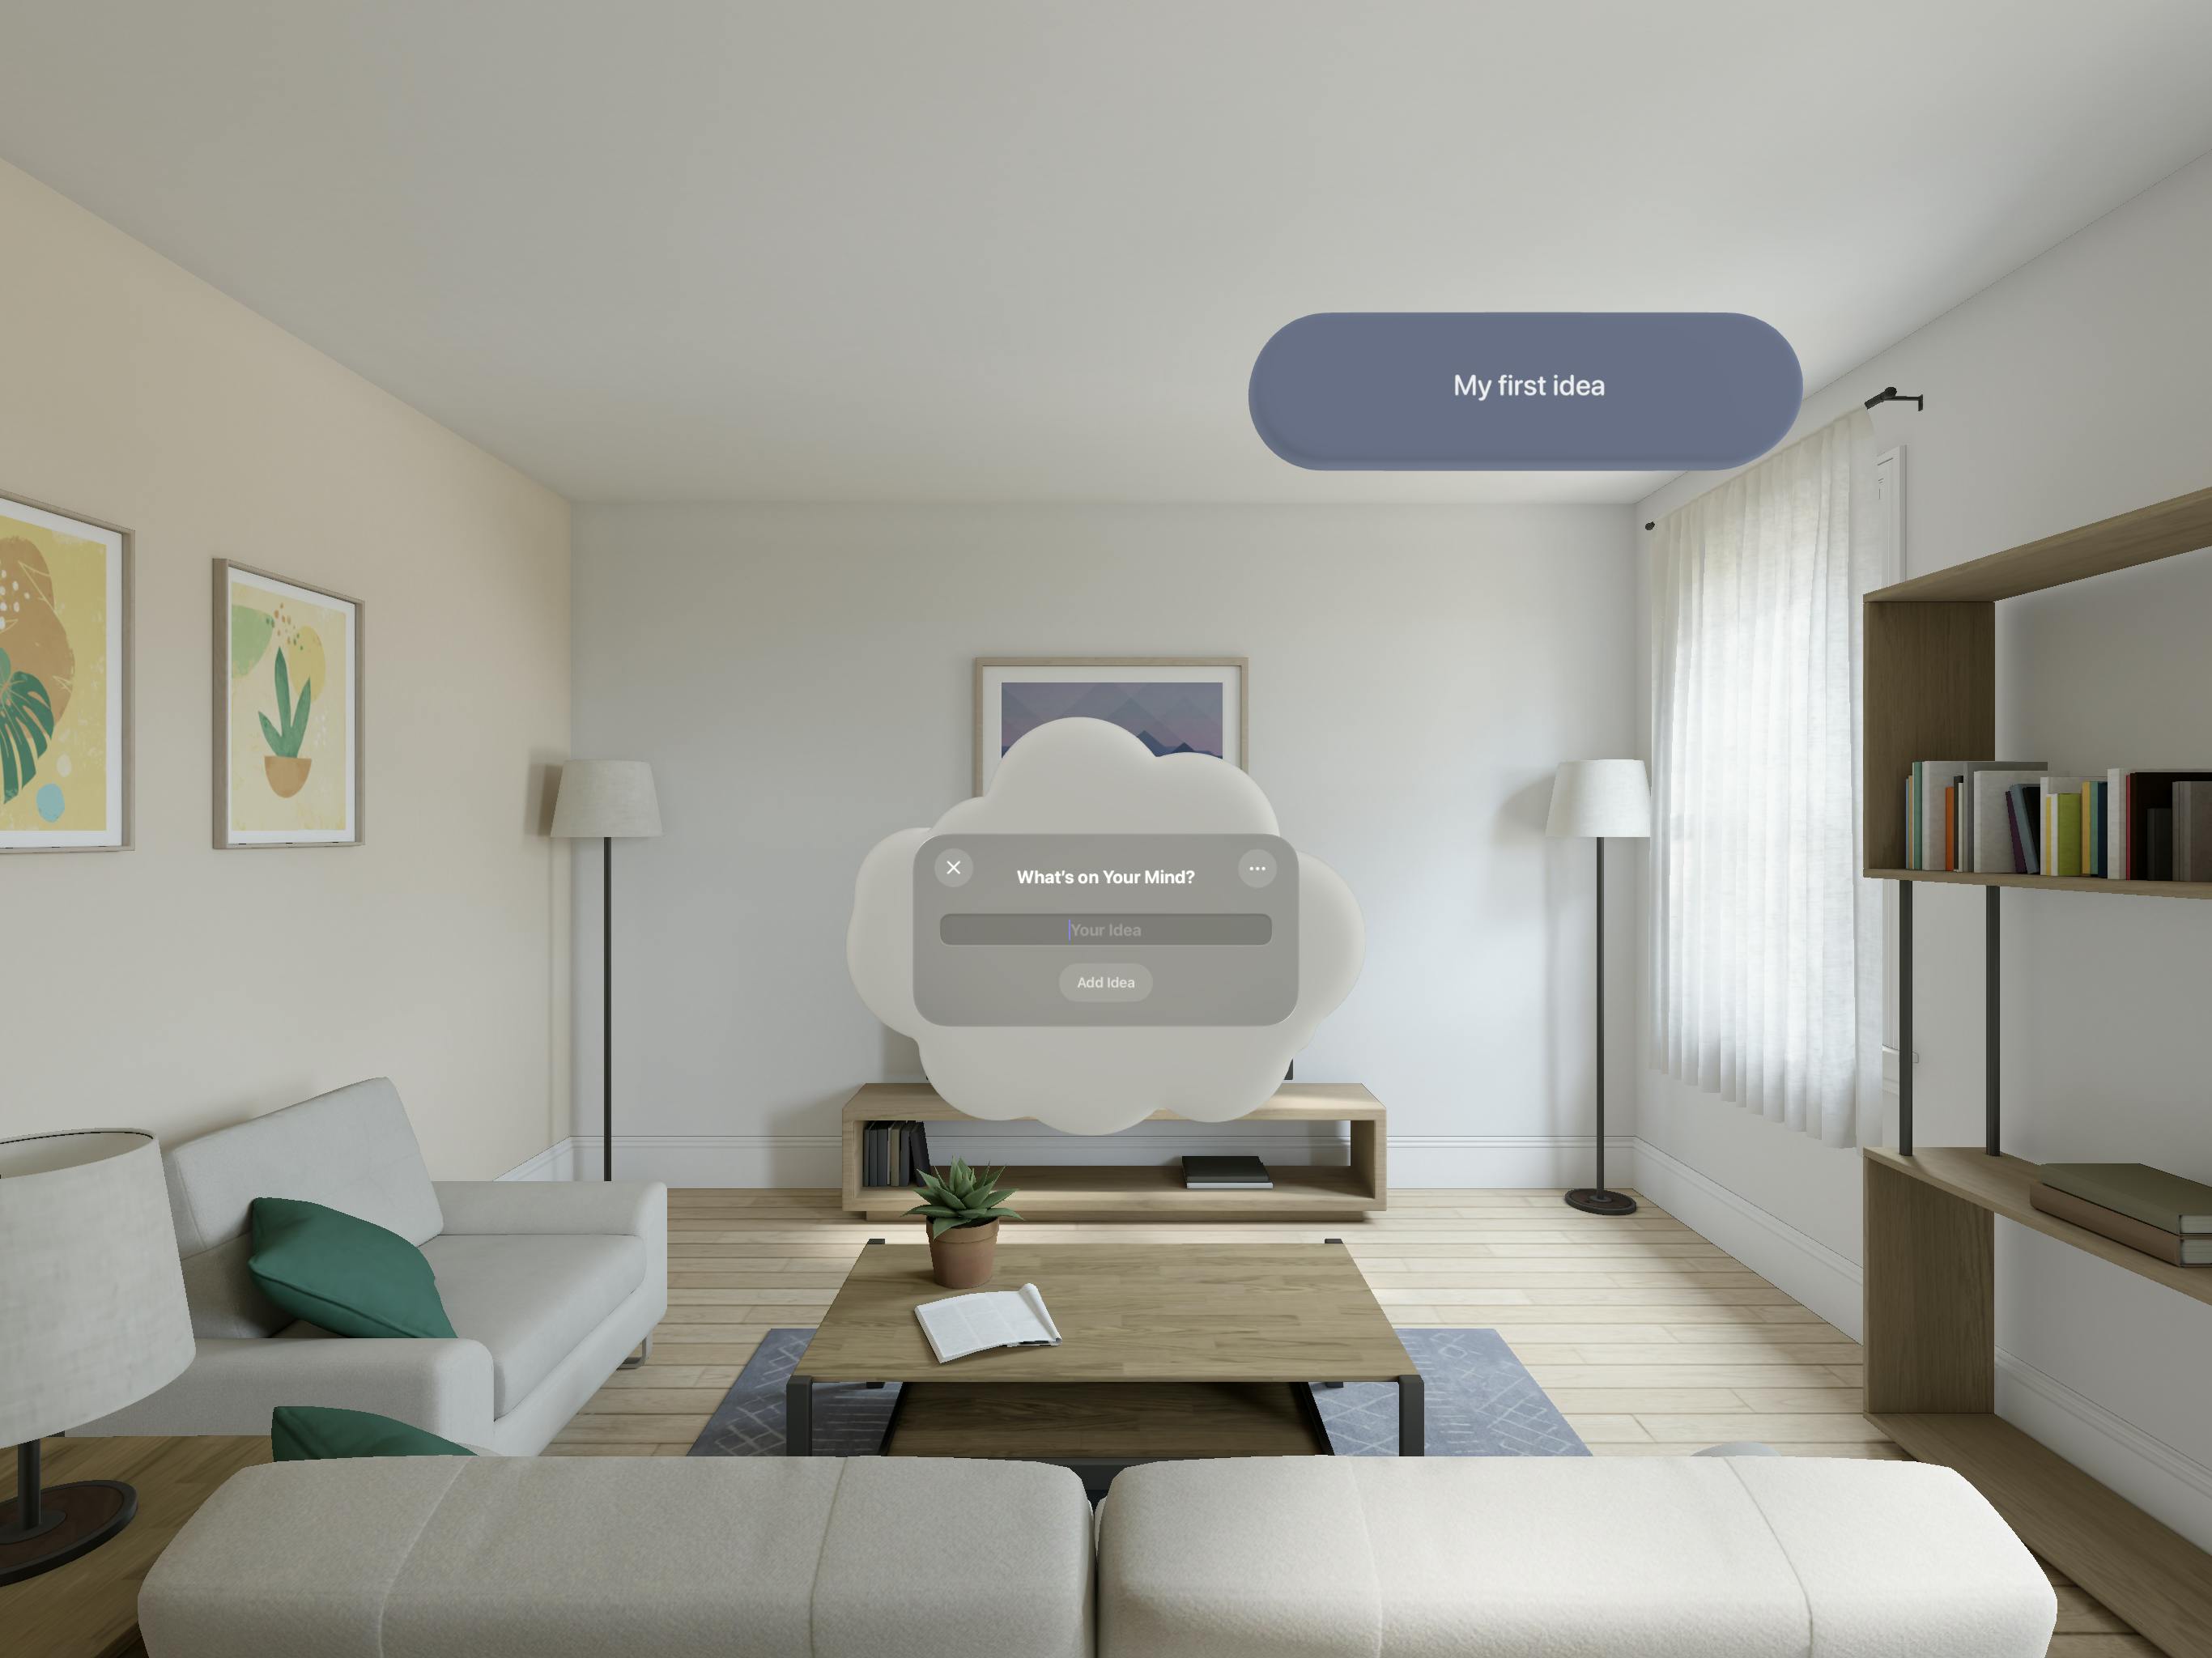 Floating central cloud in a living rooom with one first idea pill floating above it.